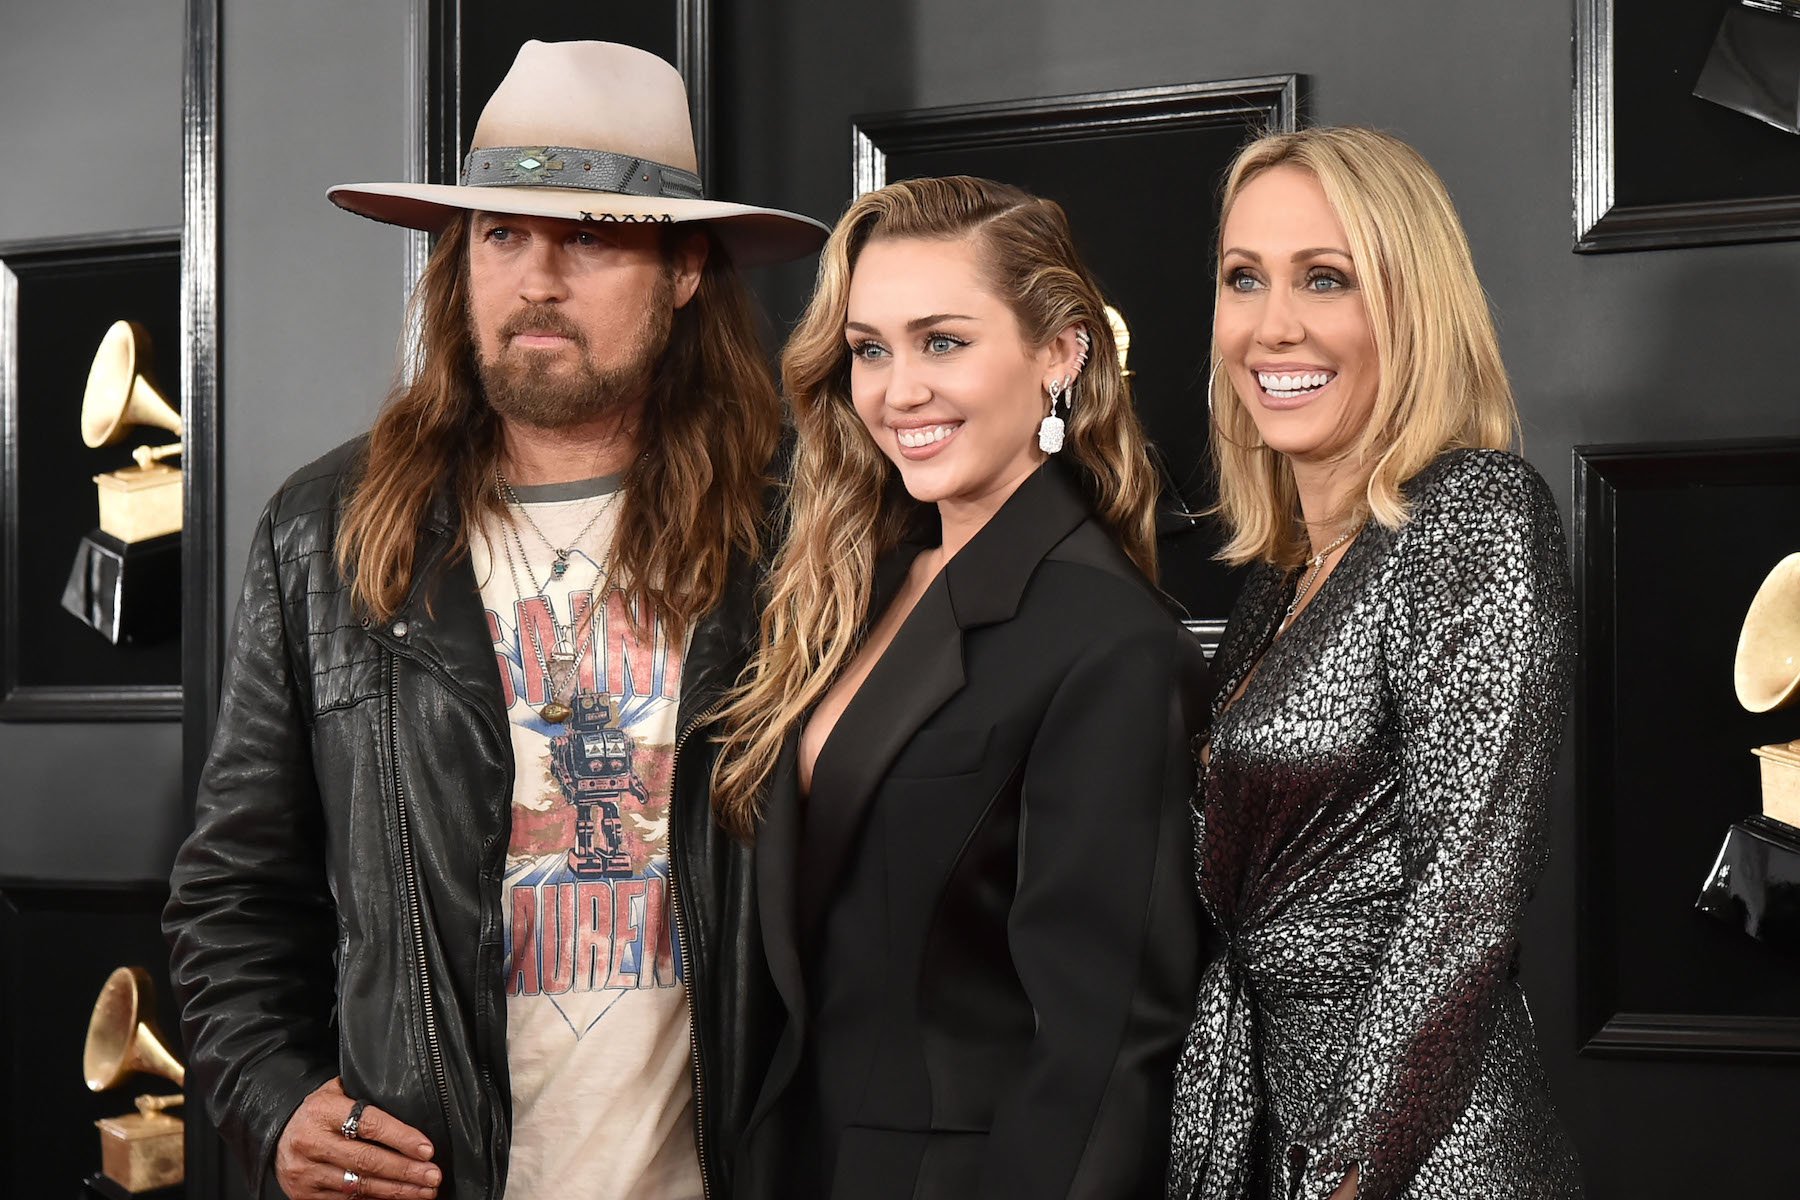 Miley Cyrus' parents, Billy Ray Cyrus and Tish Cyrus, smiling while at an event with her